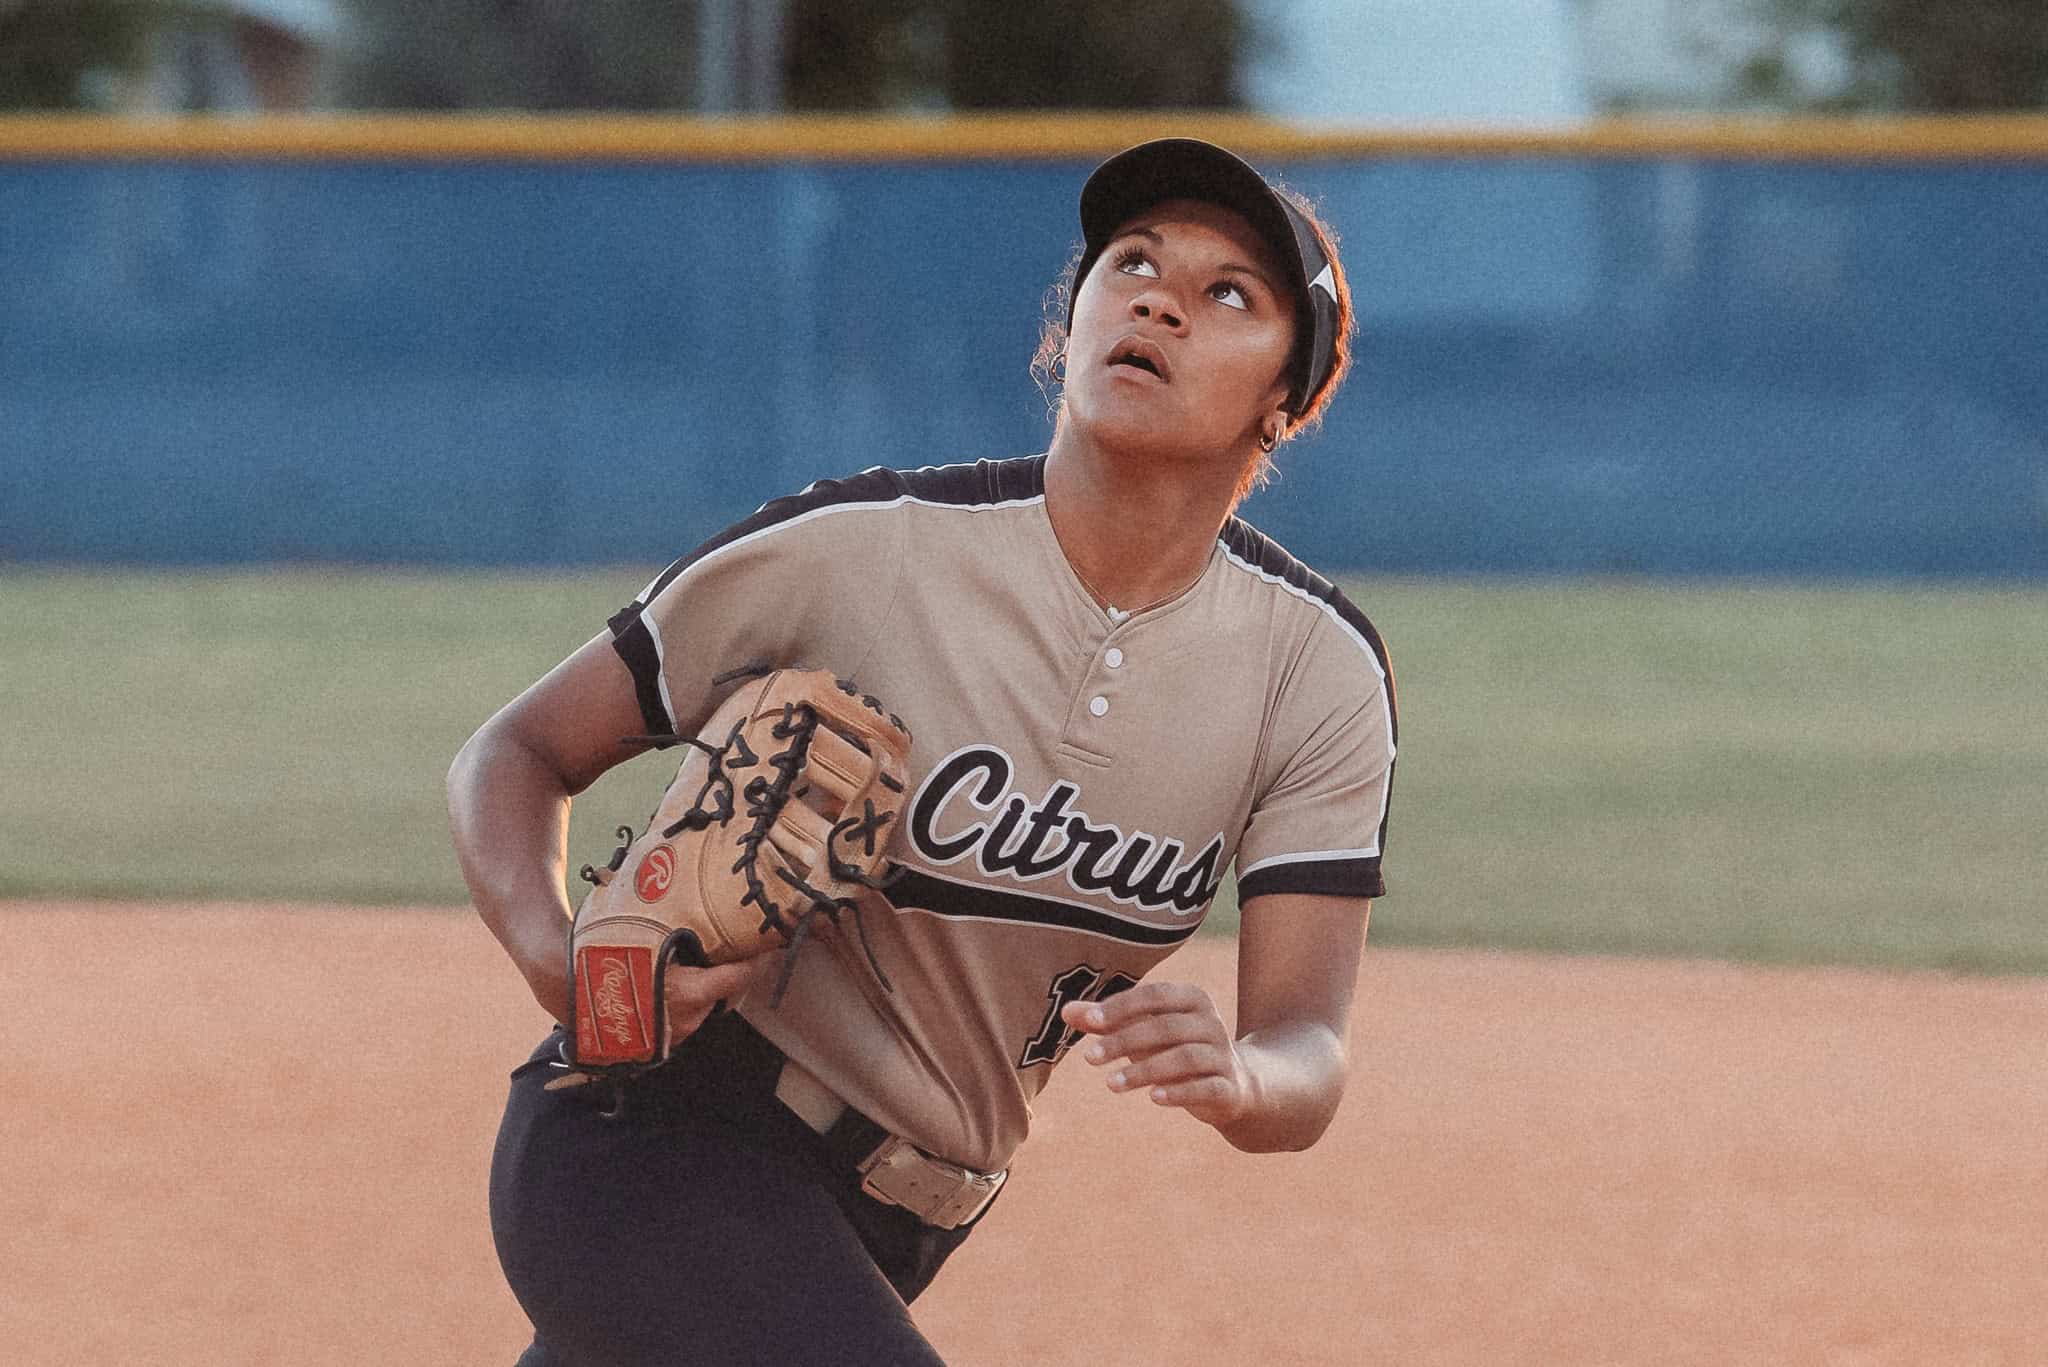 Baylie Goodwin of Citrus looks for the pop up. [Photo by Cynthia Leota]